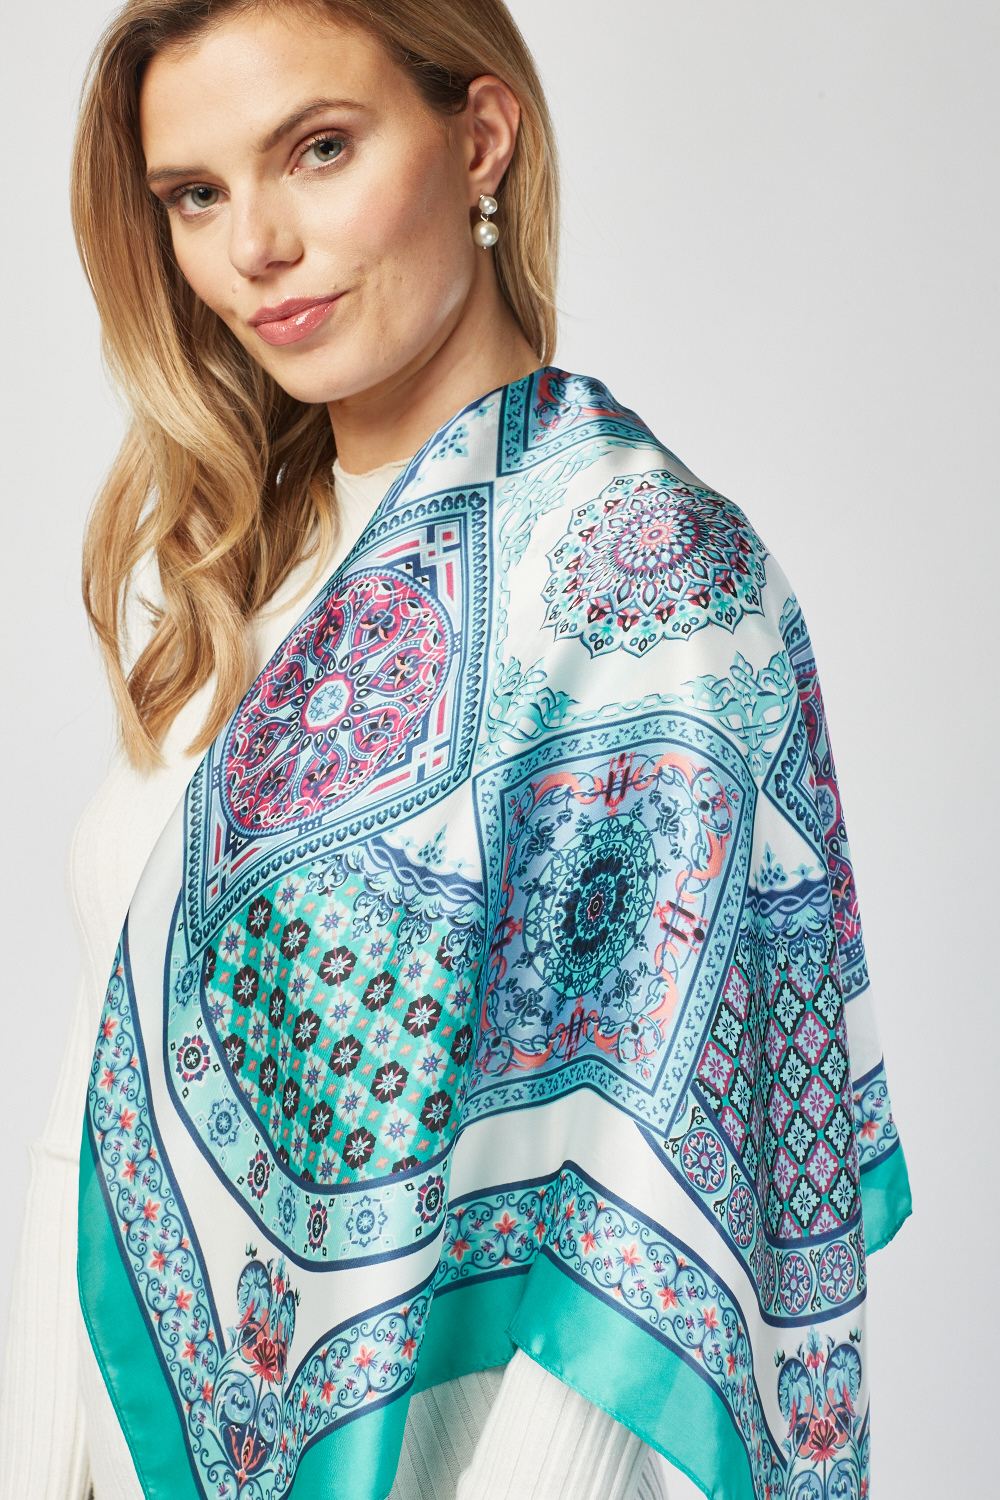 Moroccan Tile Print Scarf - Just $6